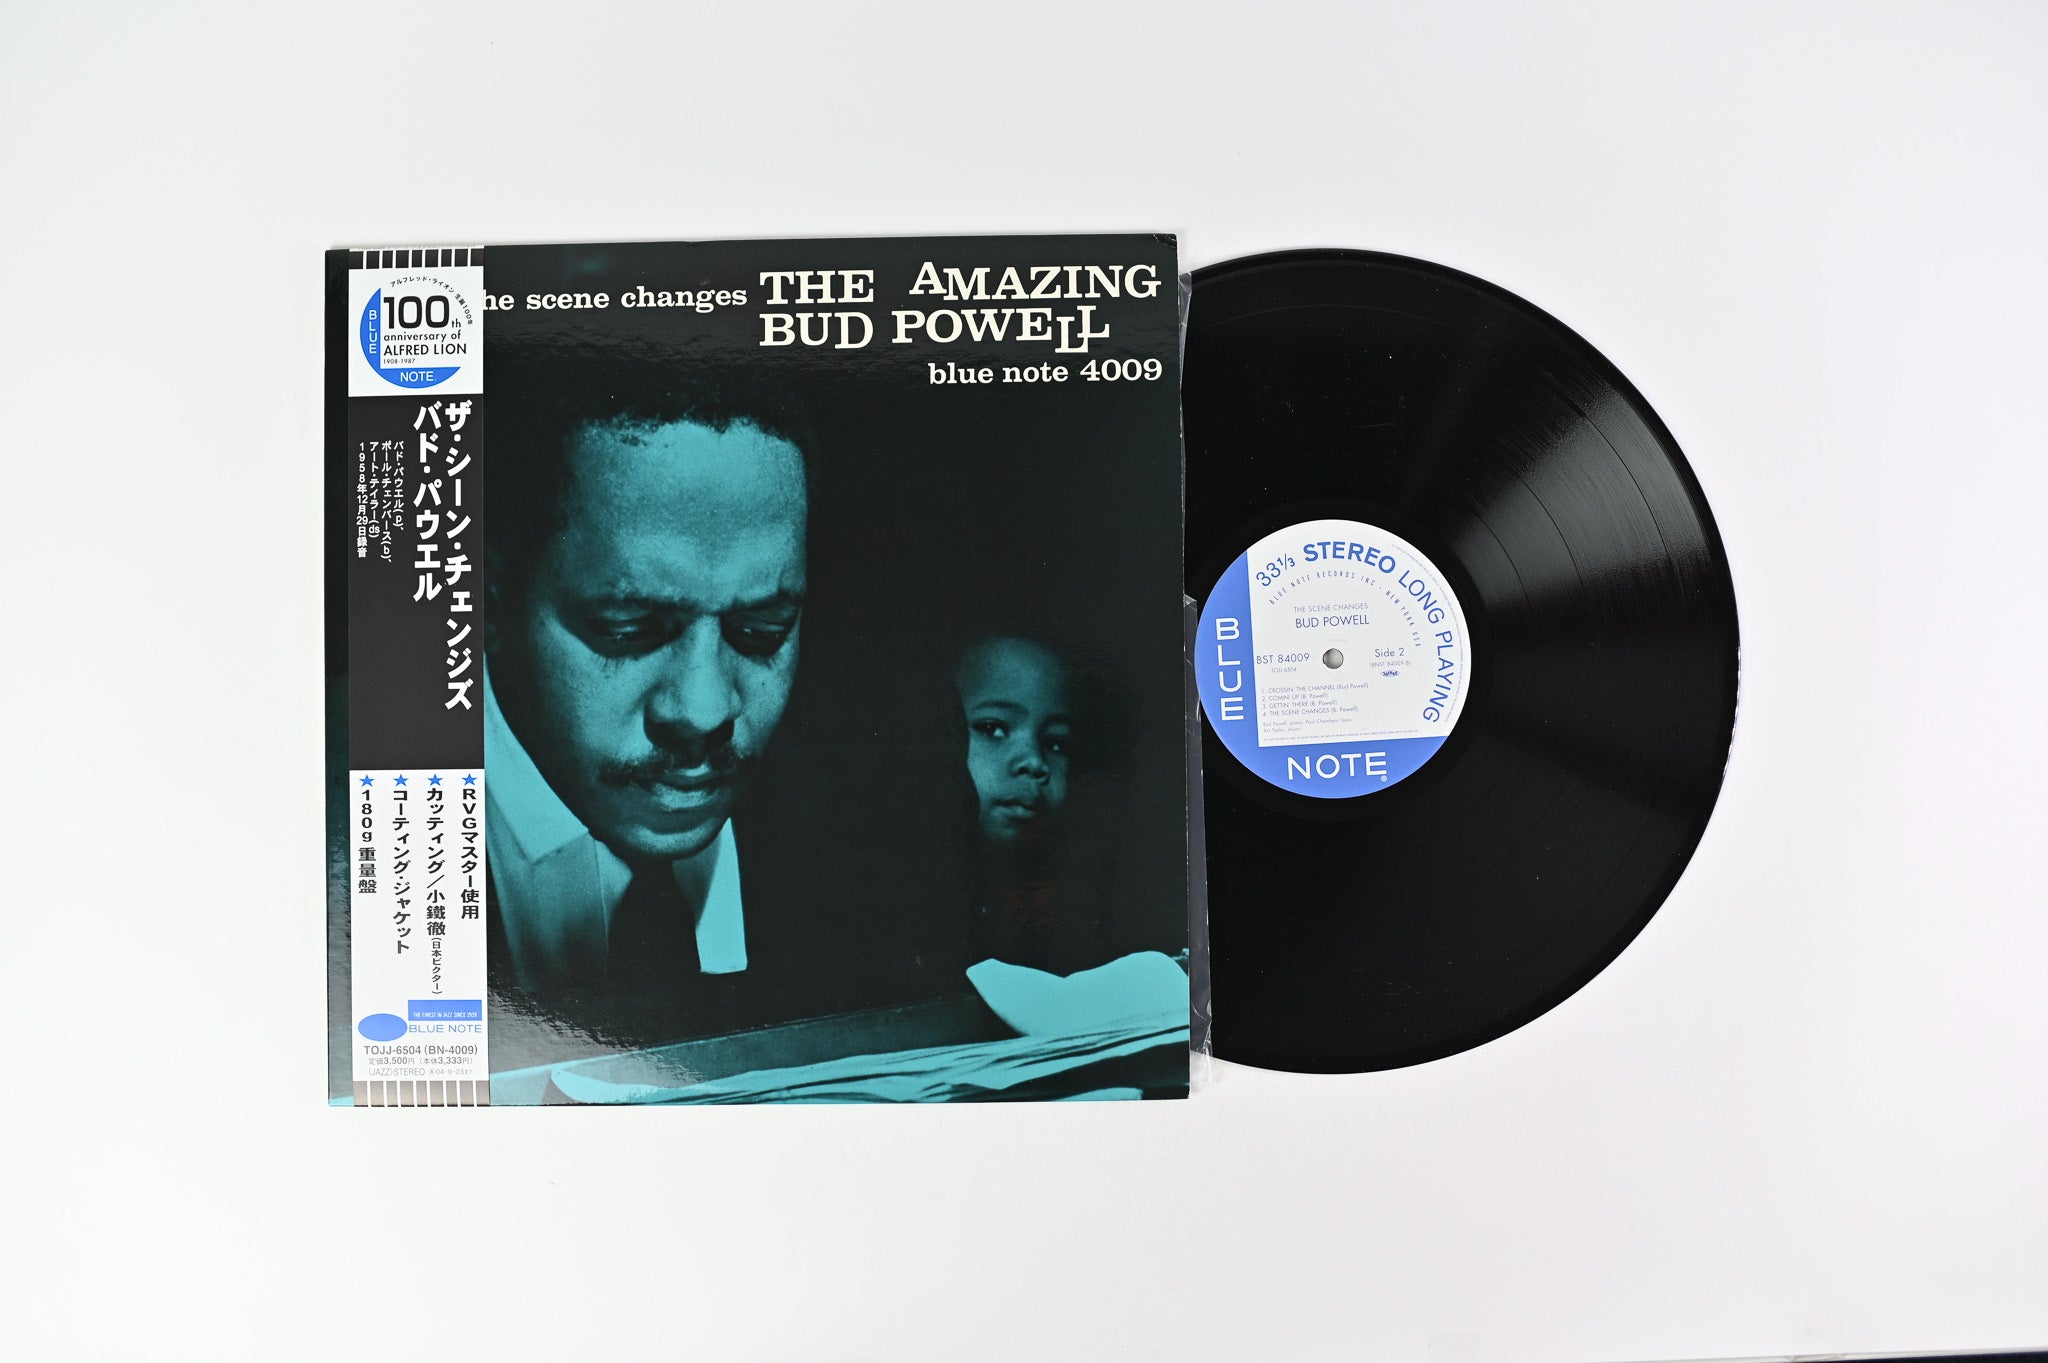 Bud Powell - The Scene Changes, Vol. 5 on Blue Note Japan Reissue